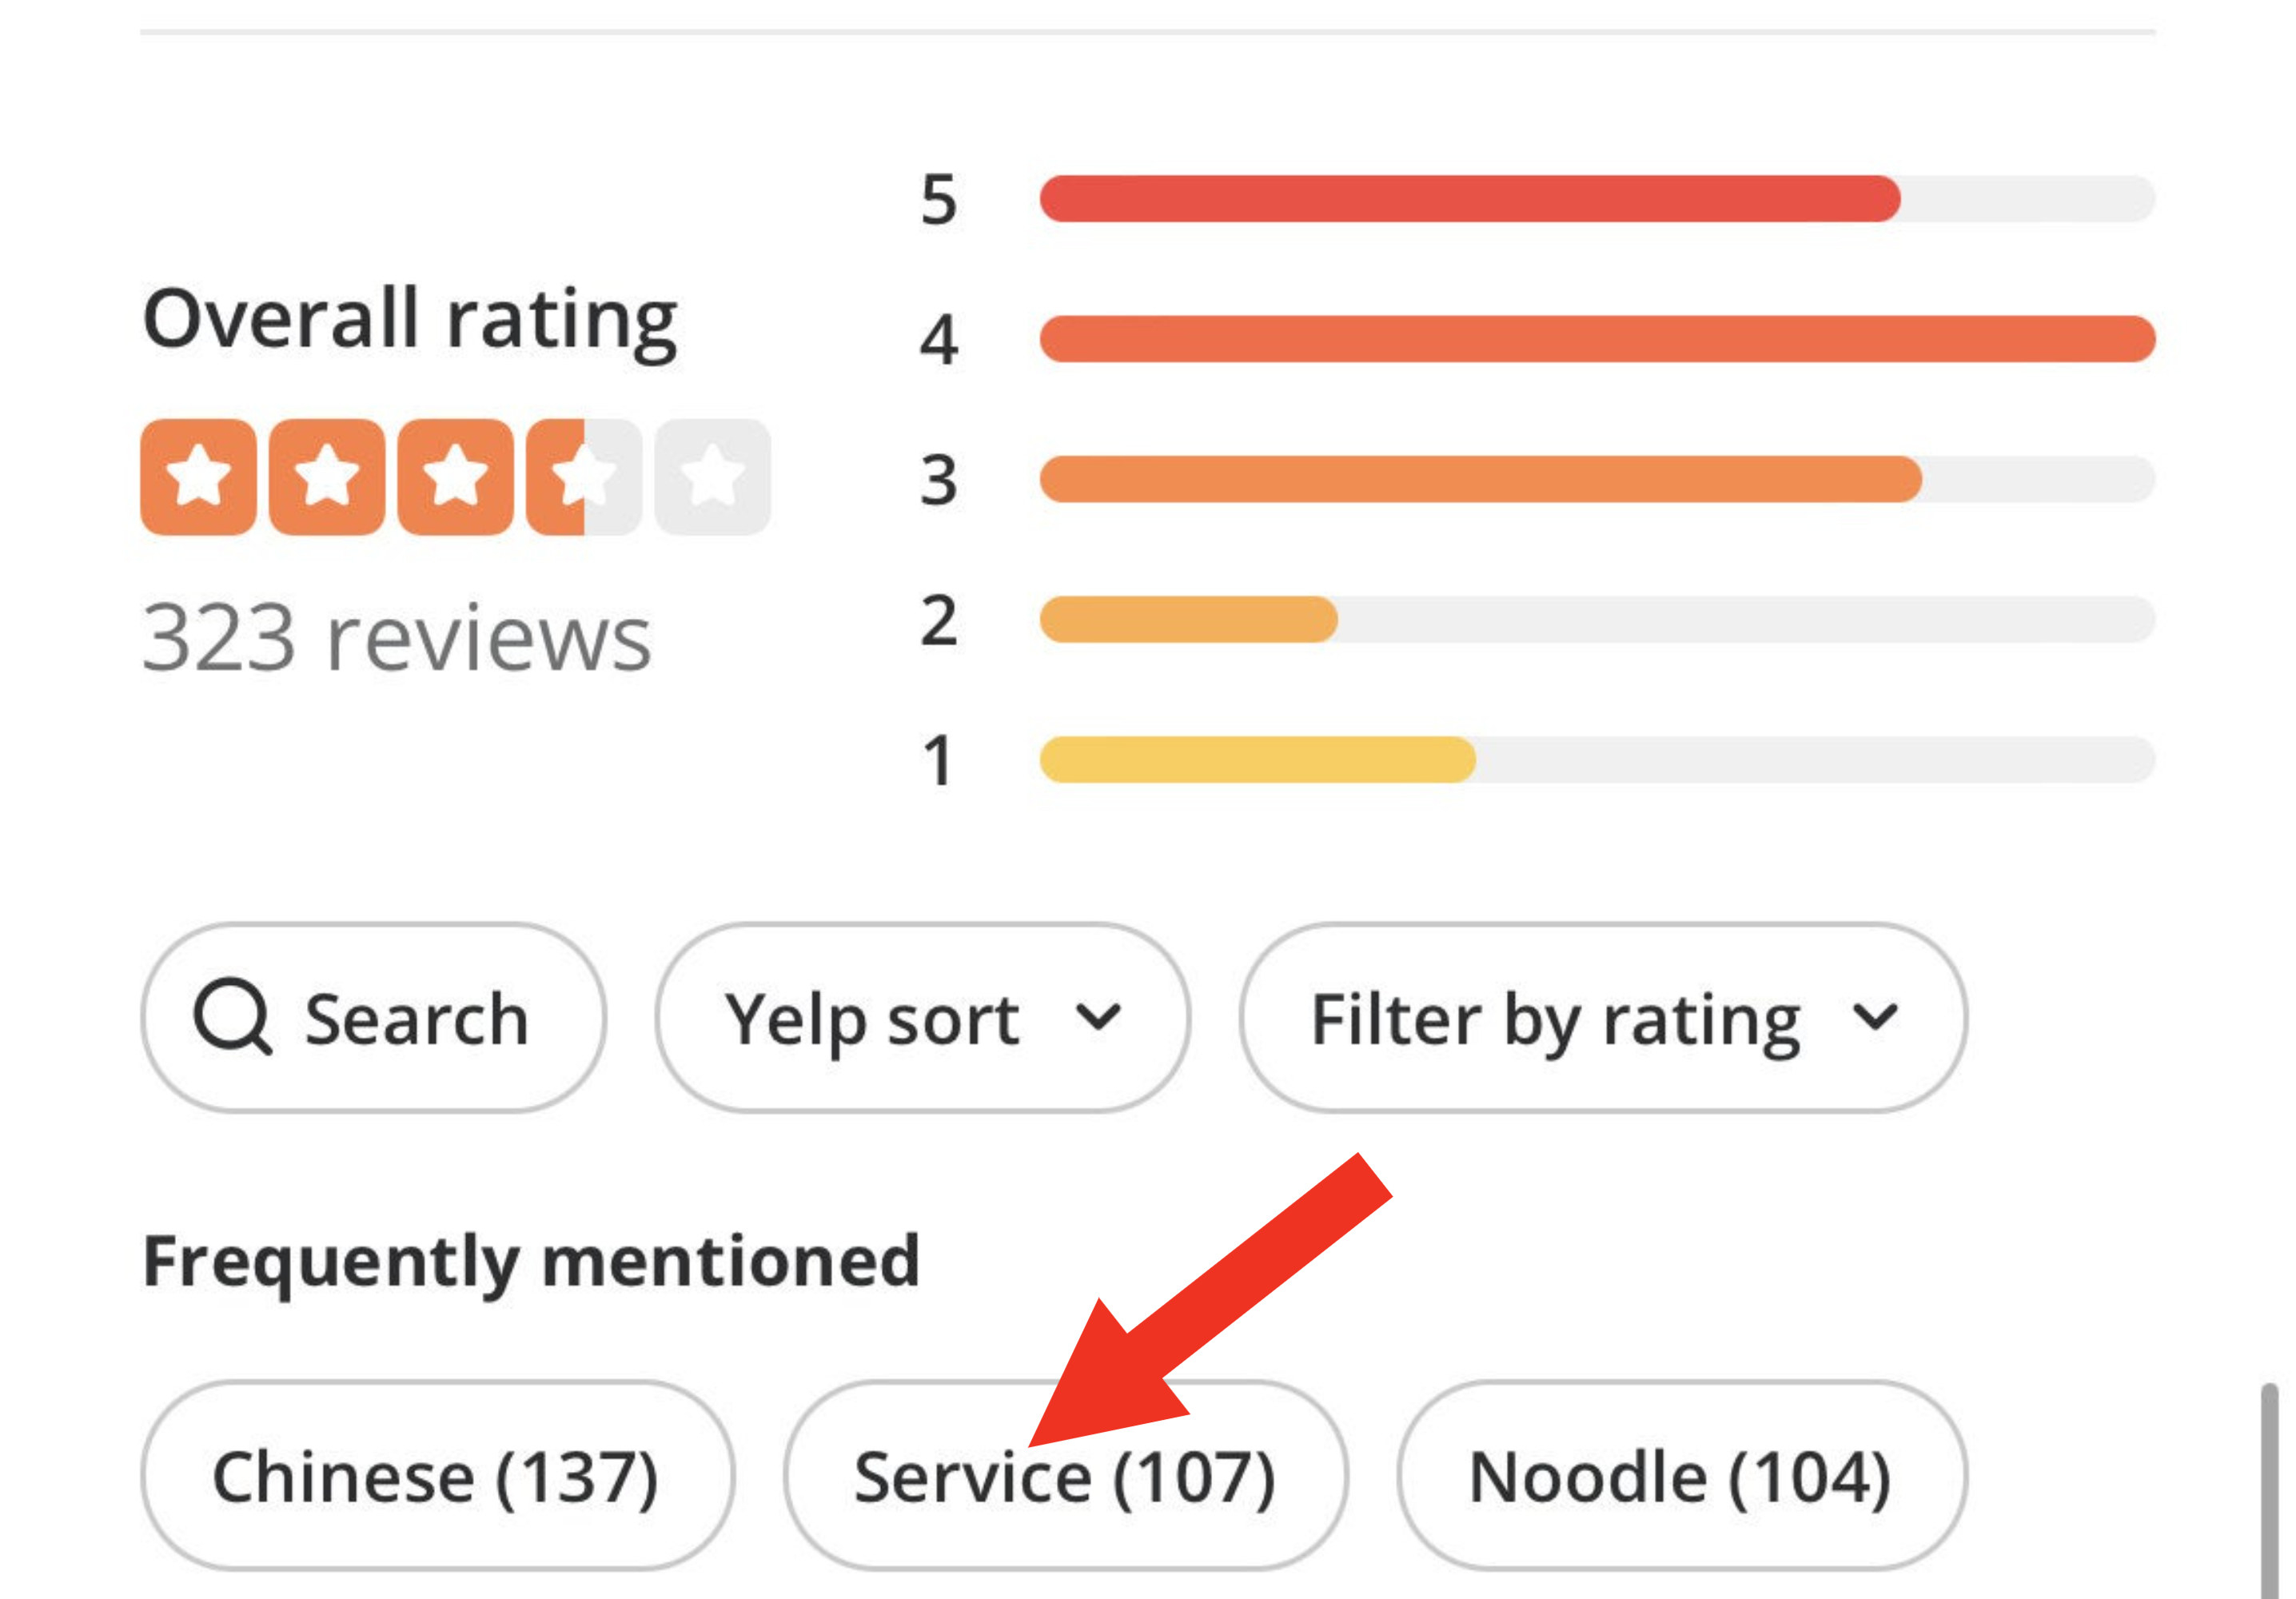 Arrow pointing to service reviews